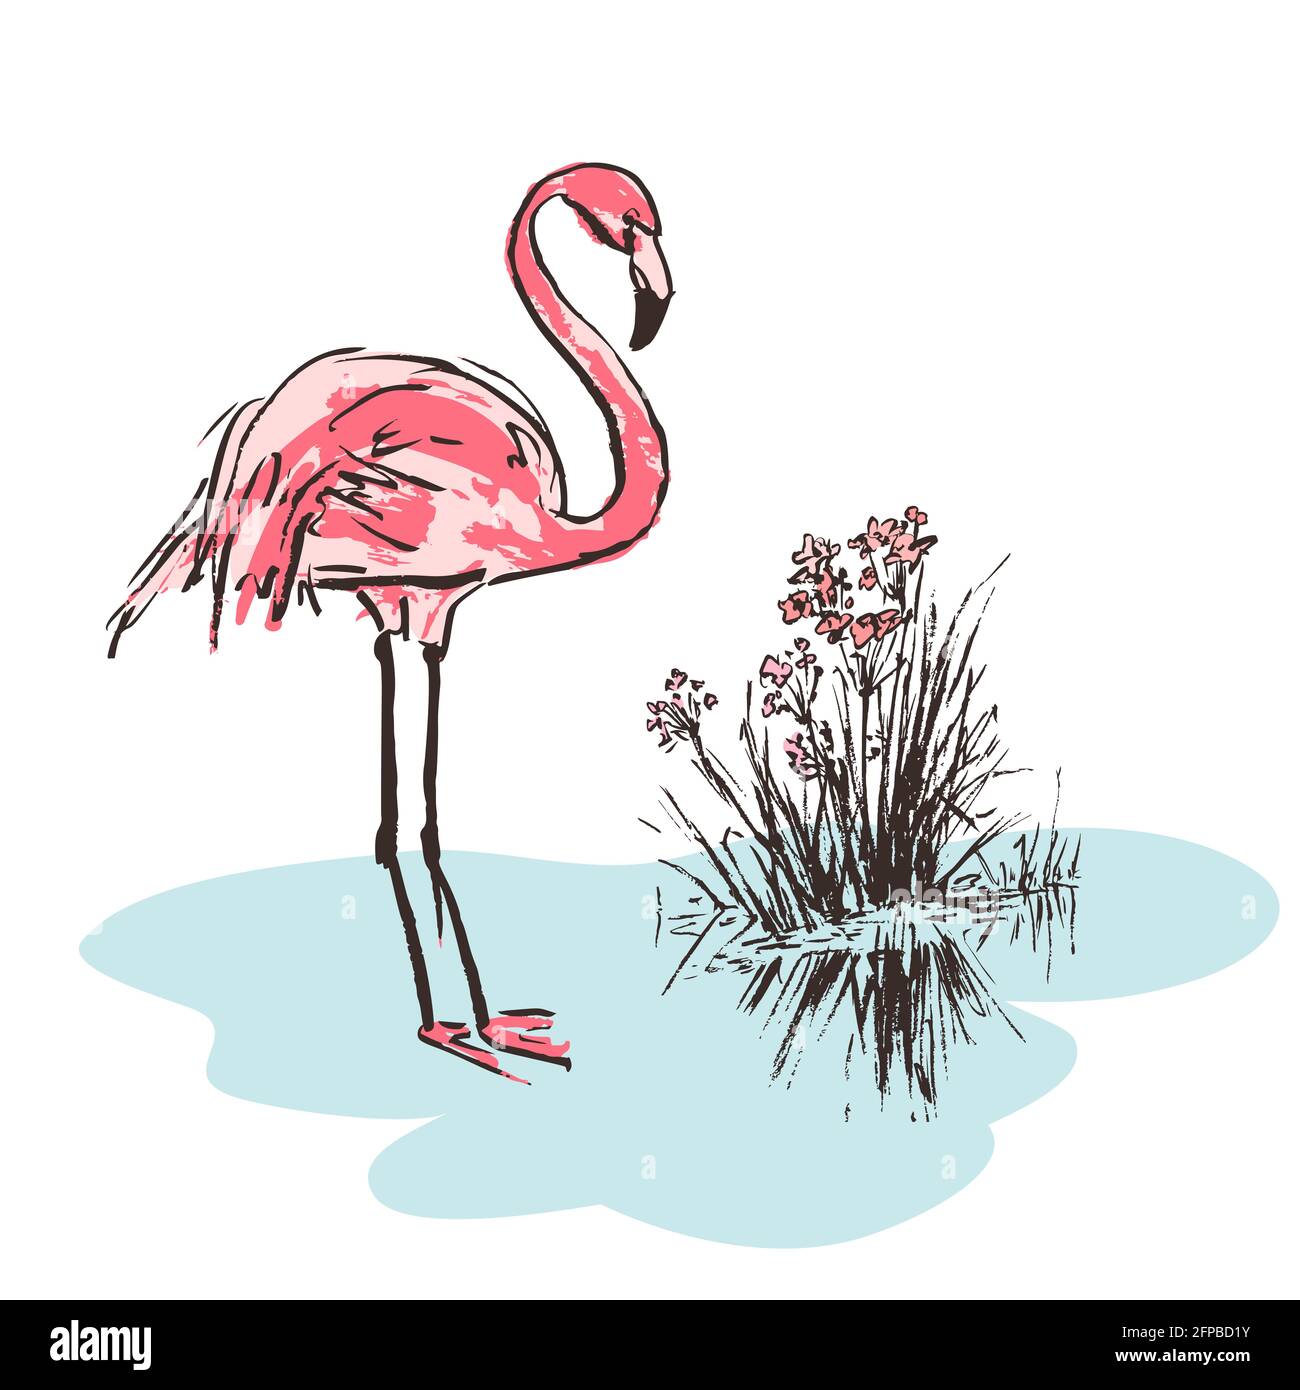 Learn How to Draw a Flamingo for Kids :) - Activities For Kids | Facebook